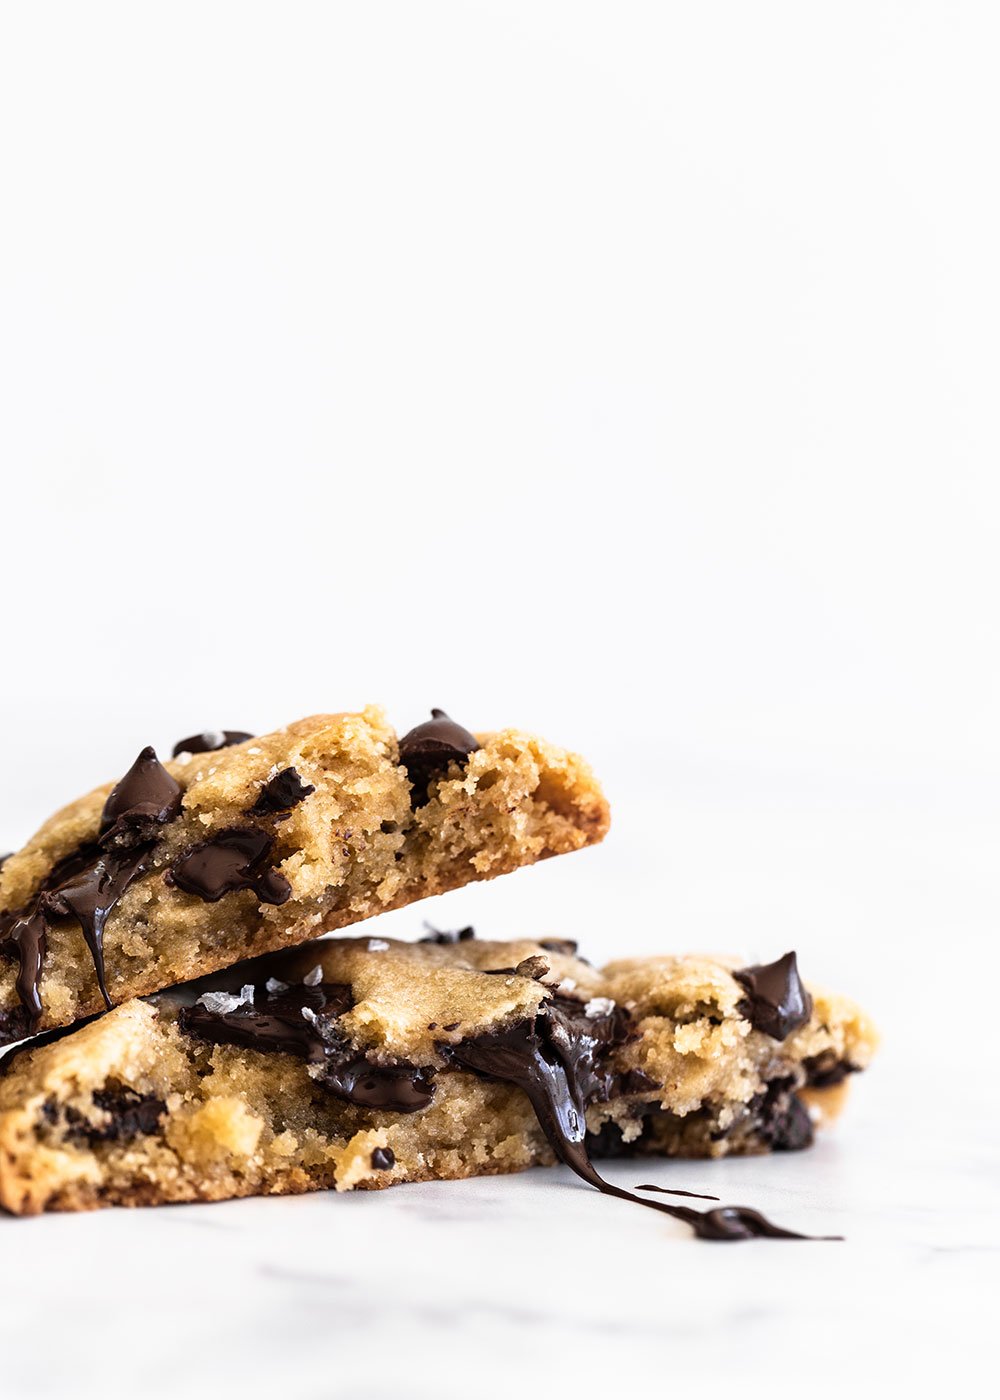 Giant chocolate chip cookies cut in half with gooey chocolate